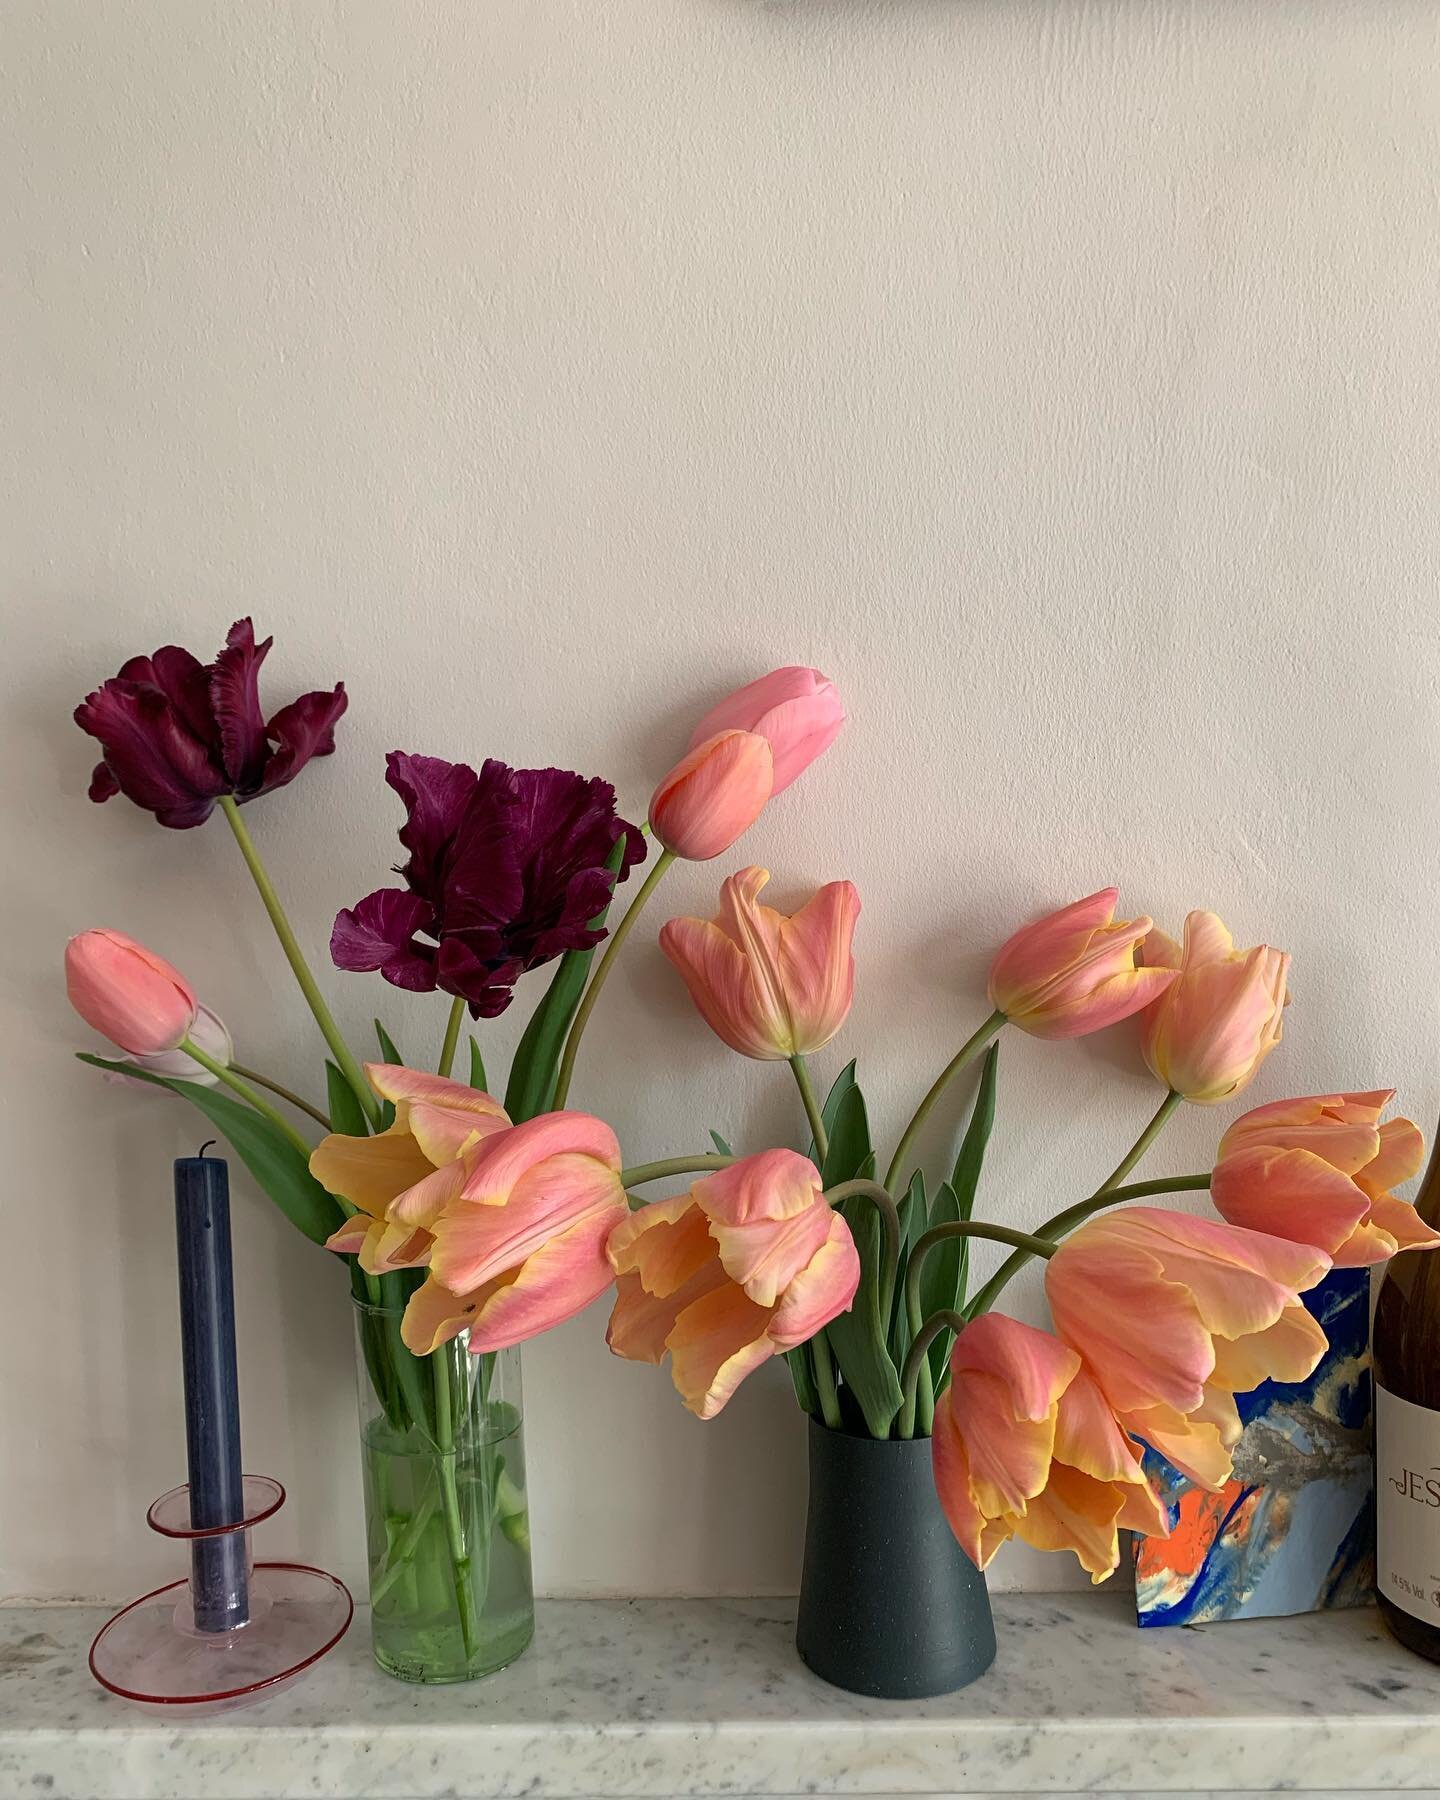 Almost the last of the tulips now to get the seedlings planted out, feeling very behind with the garden compared to last year 🌱💫